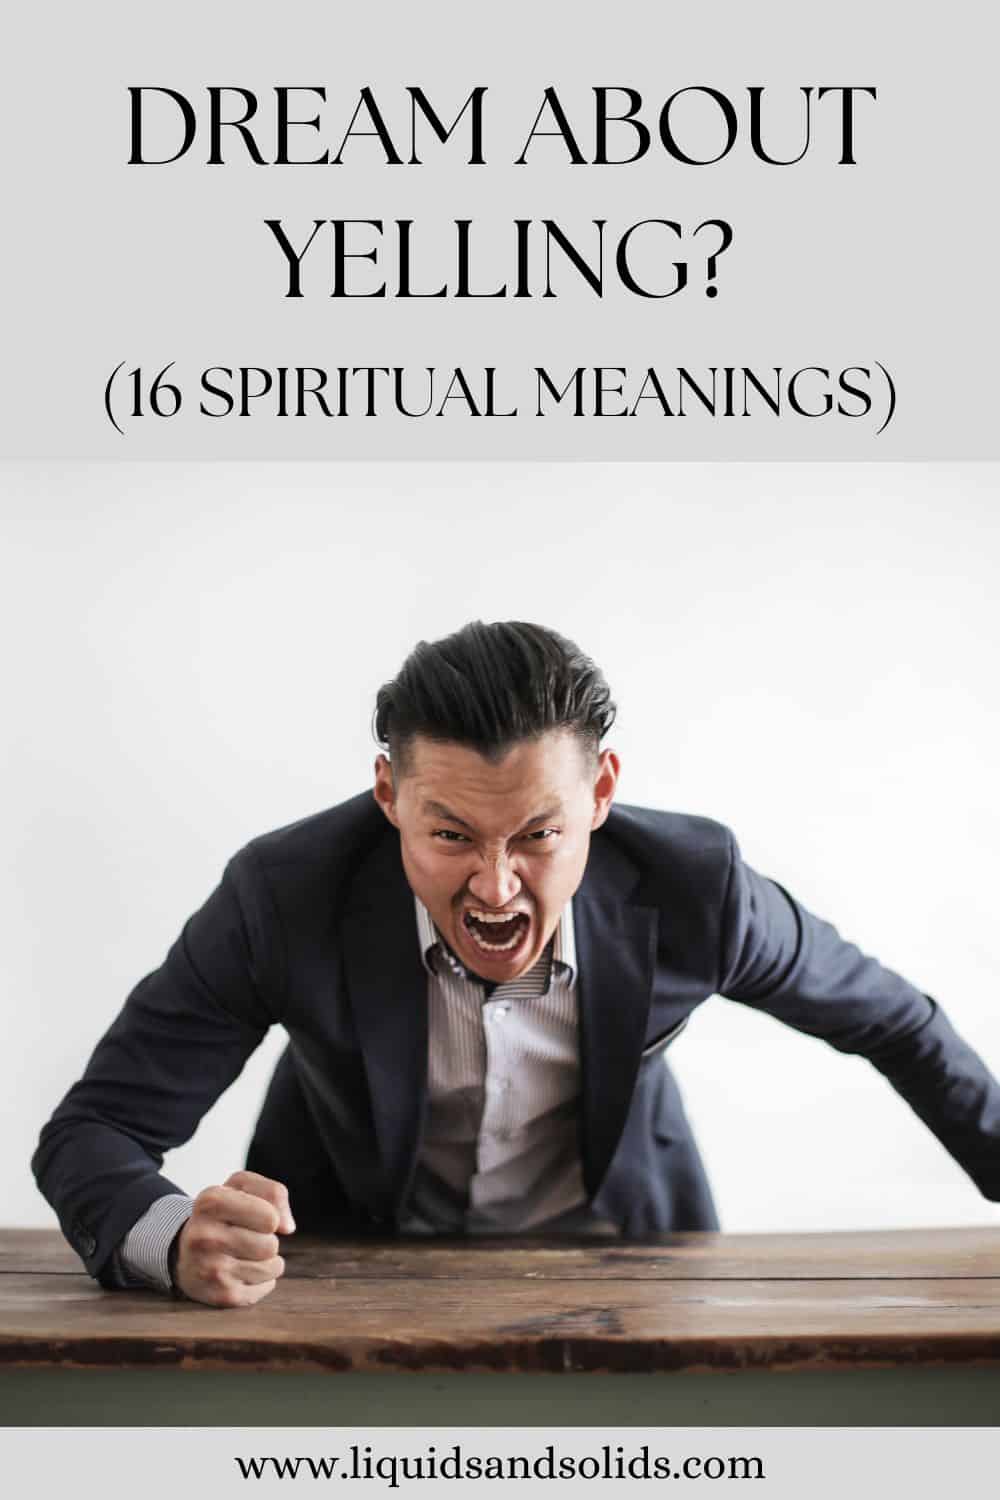 Dream About Yelling? (16 Spiritual Meanings)